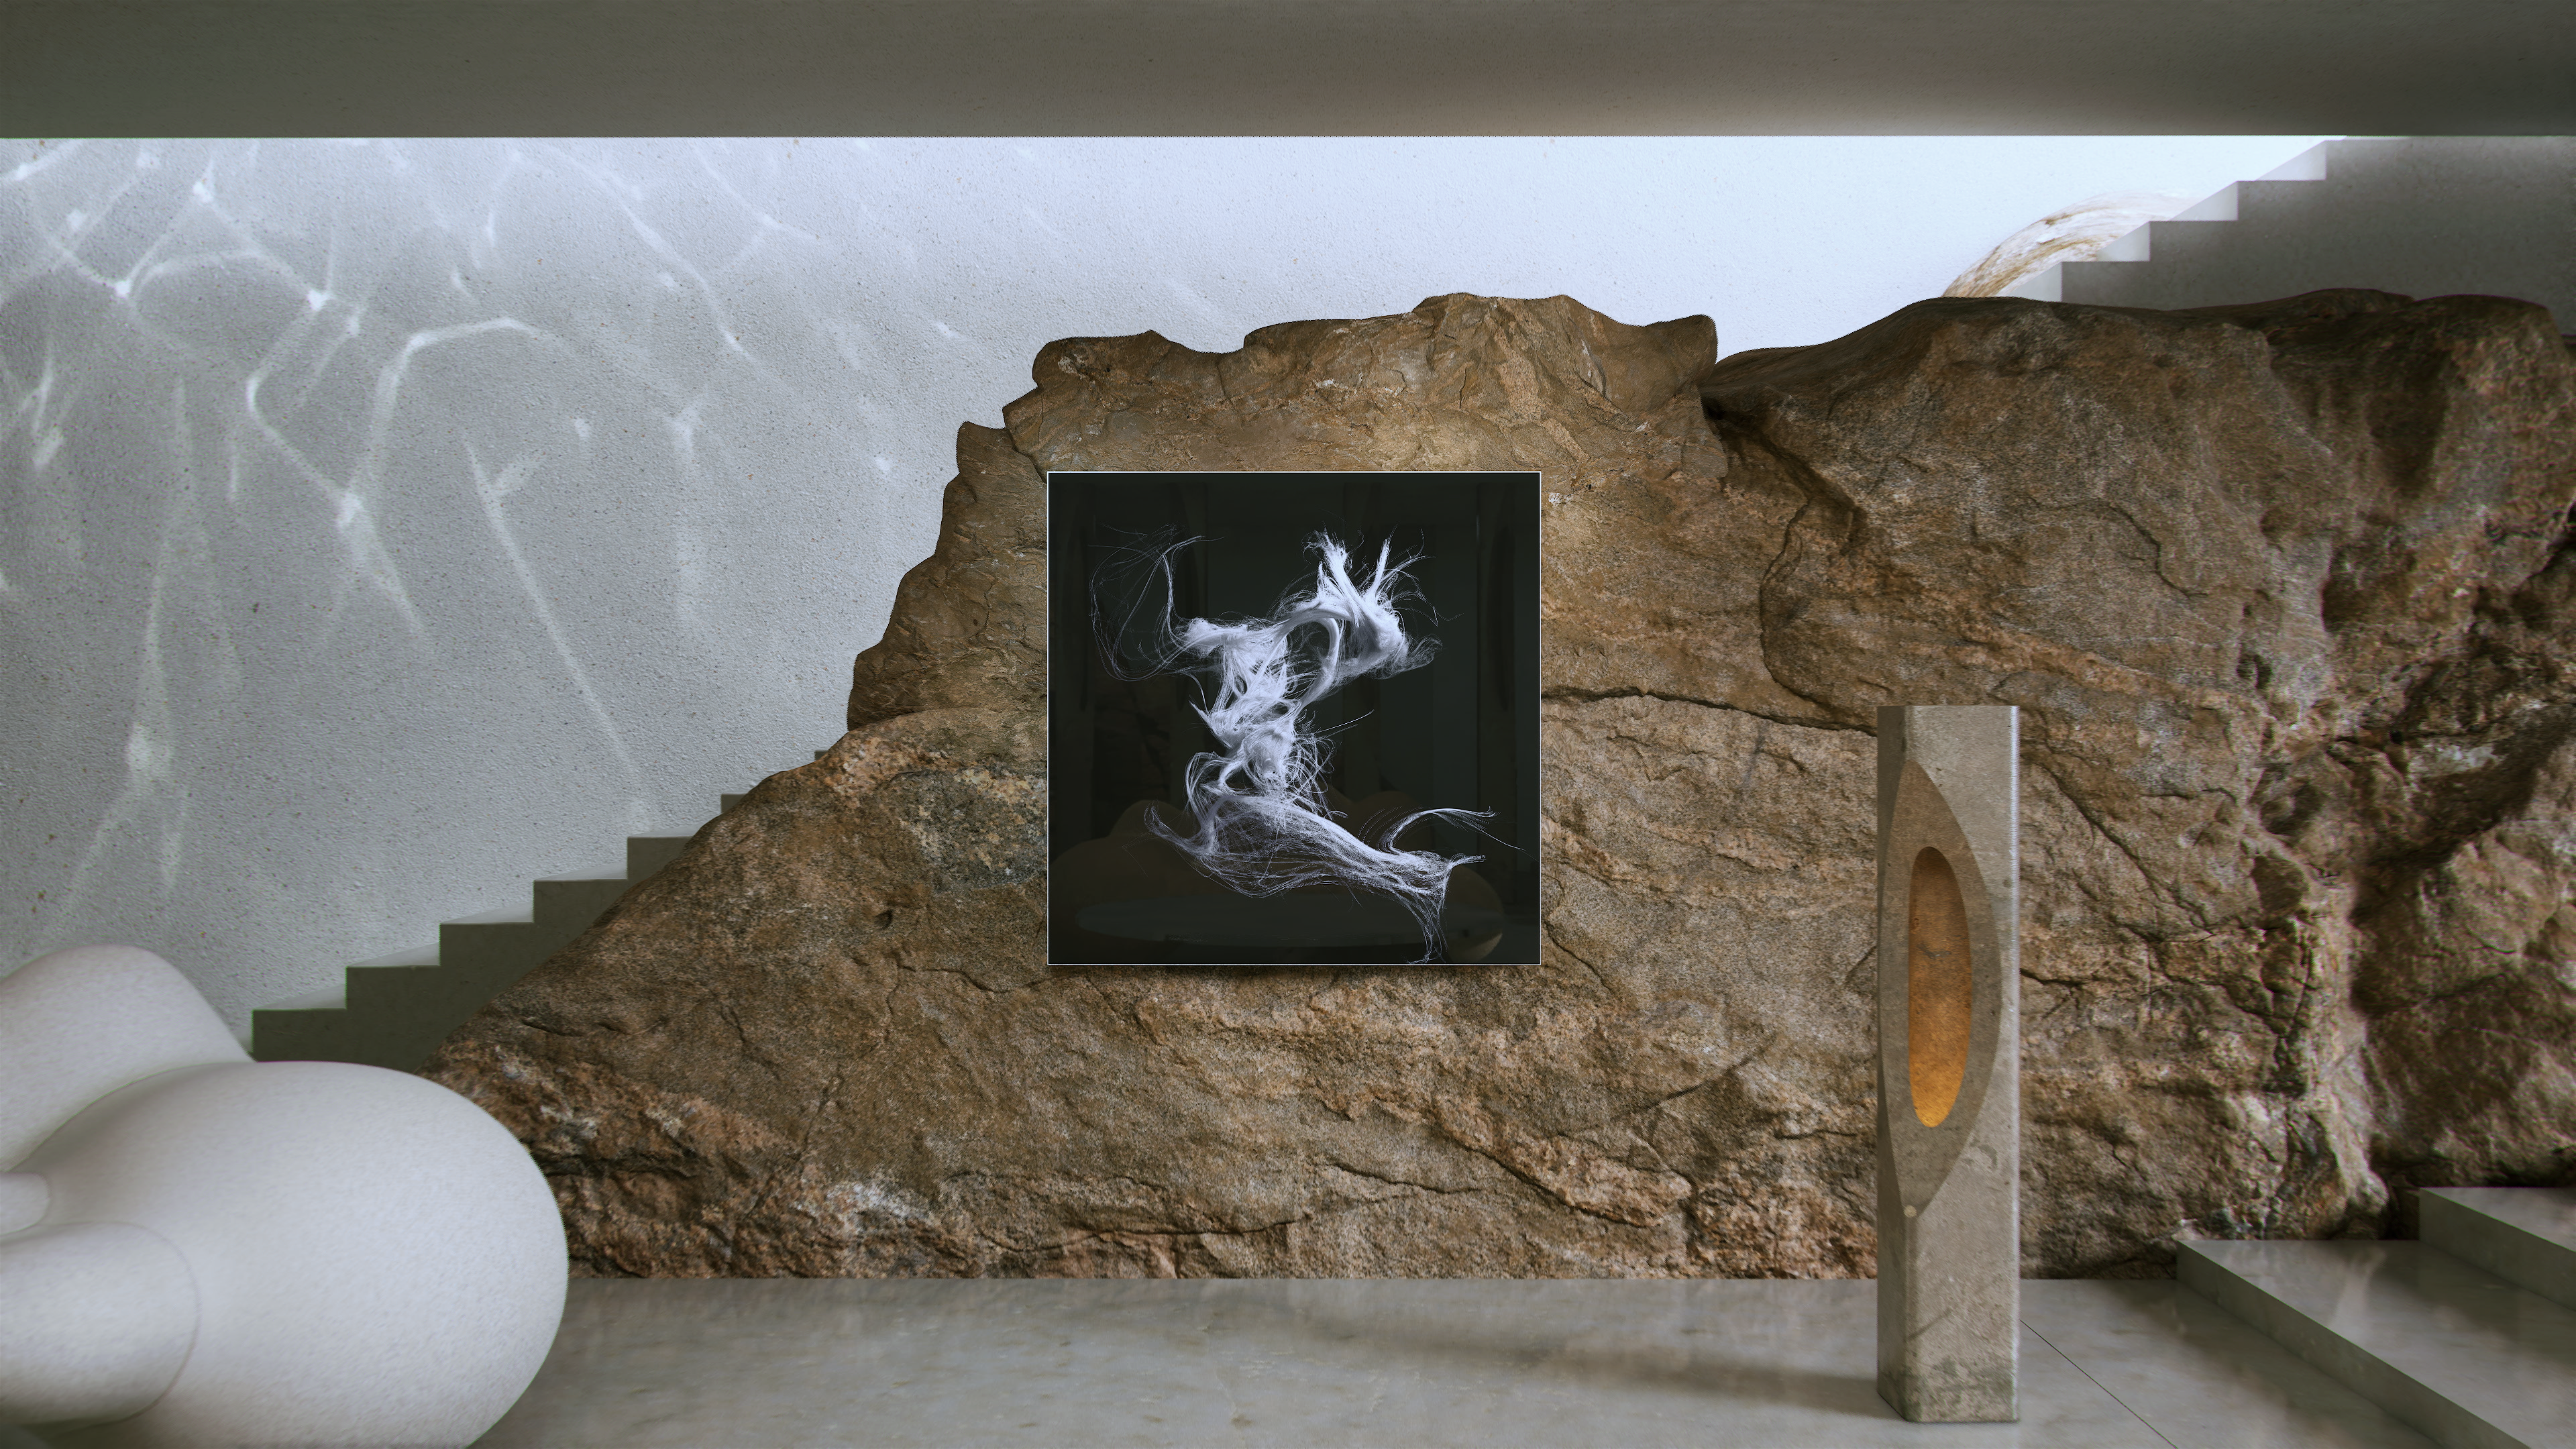 An abstract composition where a large rugged rock formation serves as a backdrop to a sleek black frame showcasing a dynamic white fibrous structure, complemented by a minimalist sculpture and spherical forms in the foreground within a modern architectural space